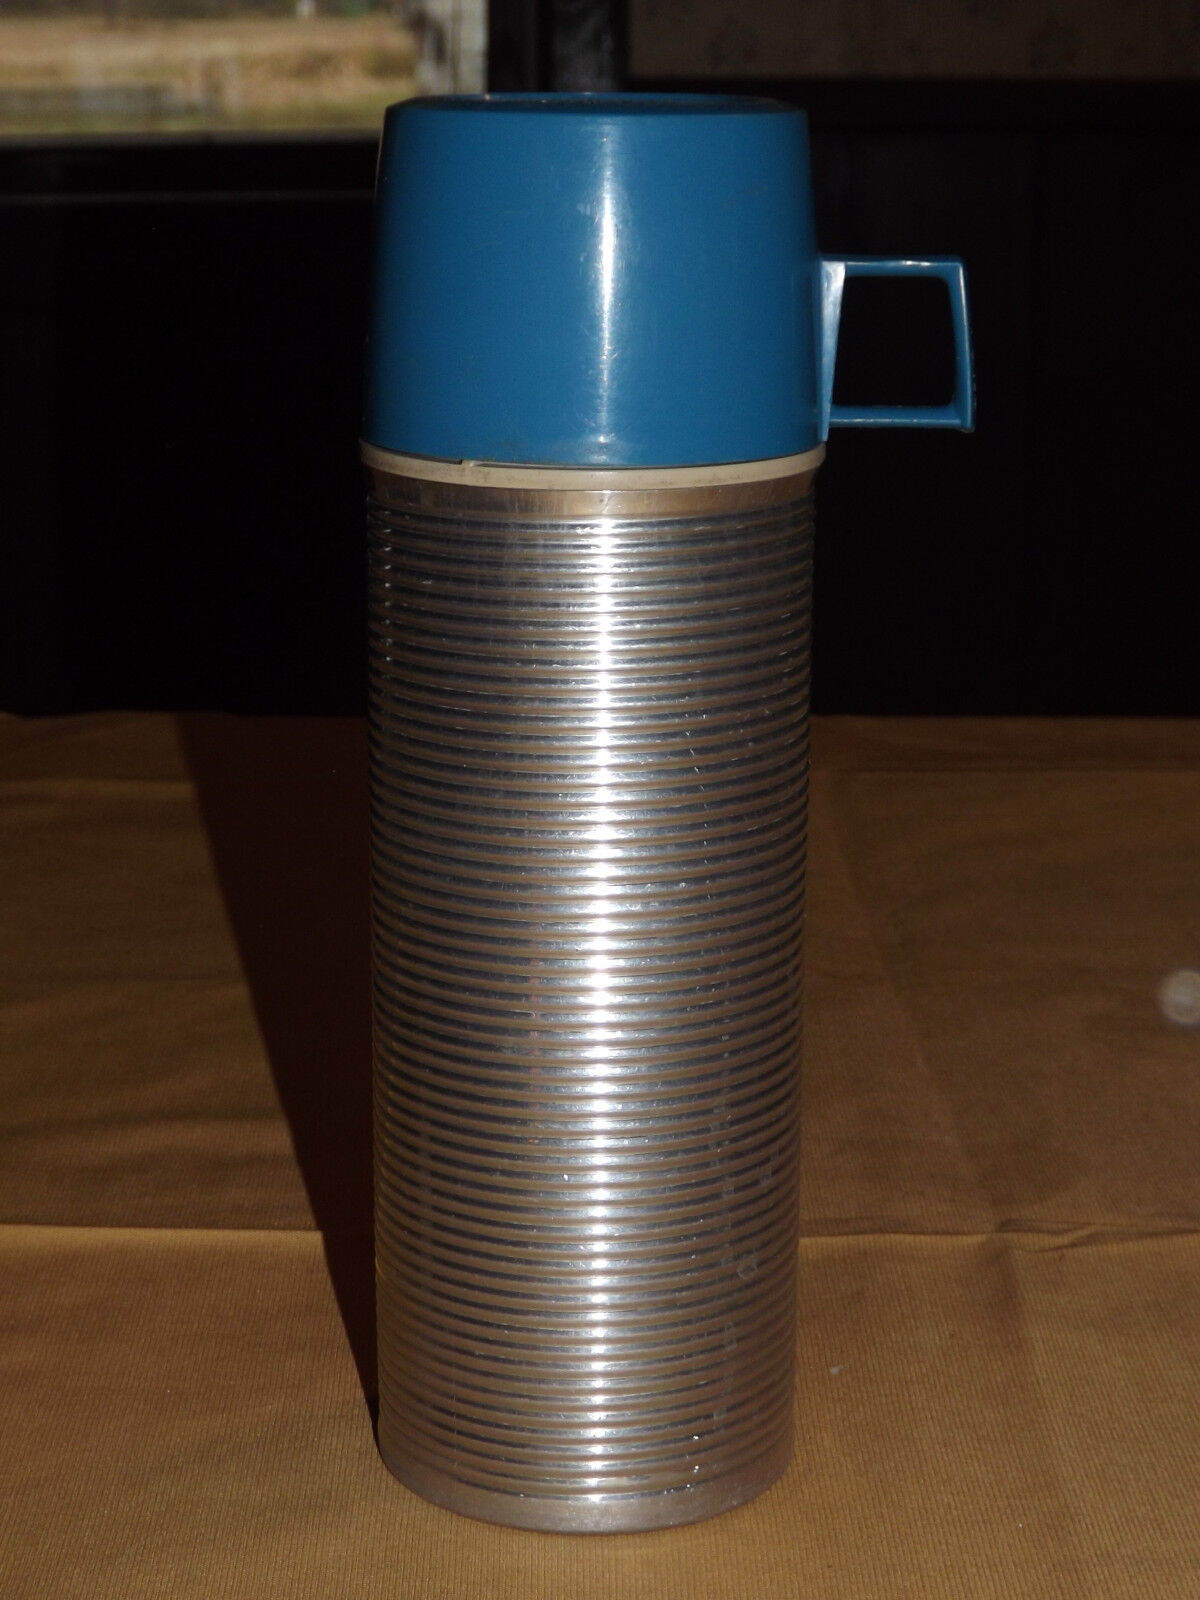 VINTAGE 1960S SILVER  WITH BLUE TOP  TOP KING SEELEY # 2284  METAL THERMOS